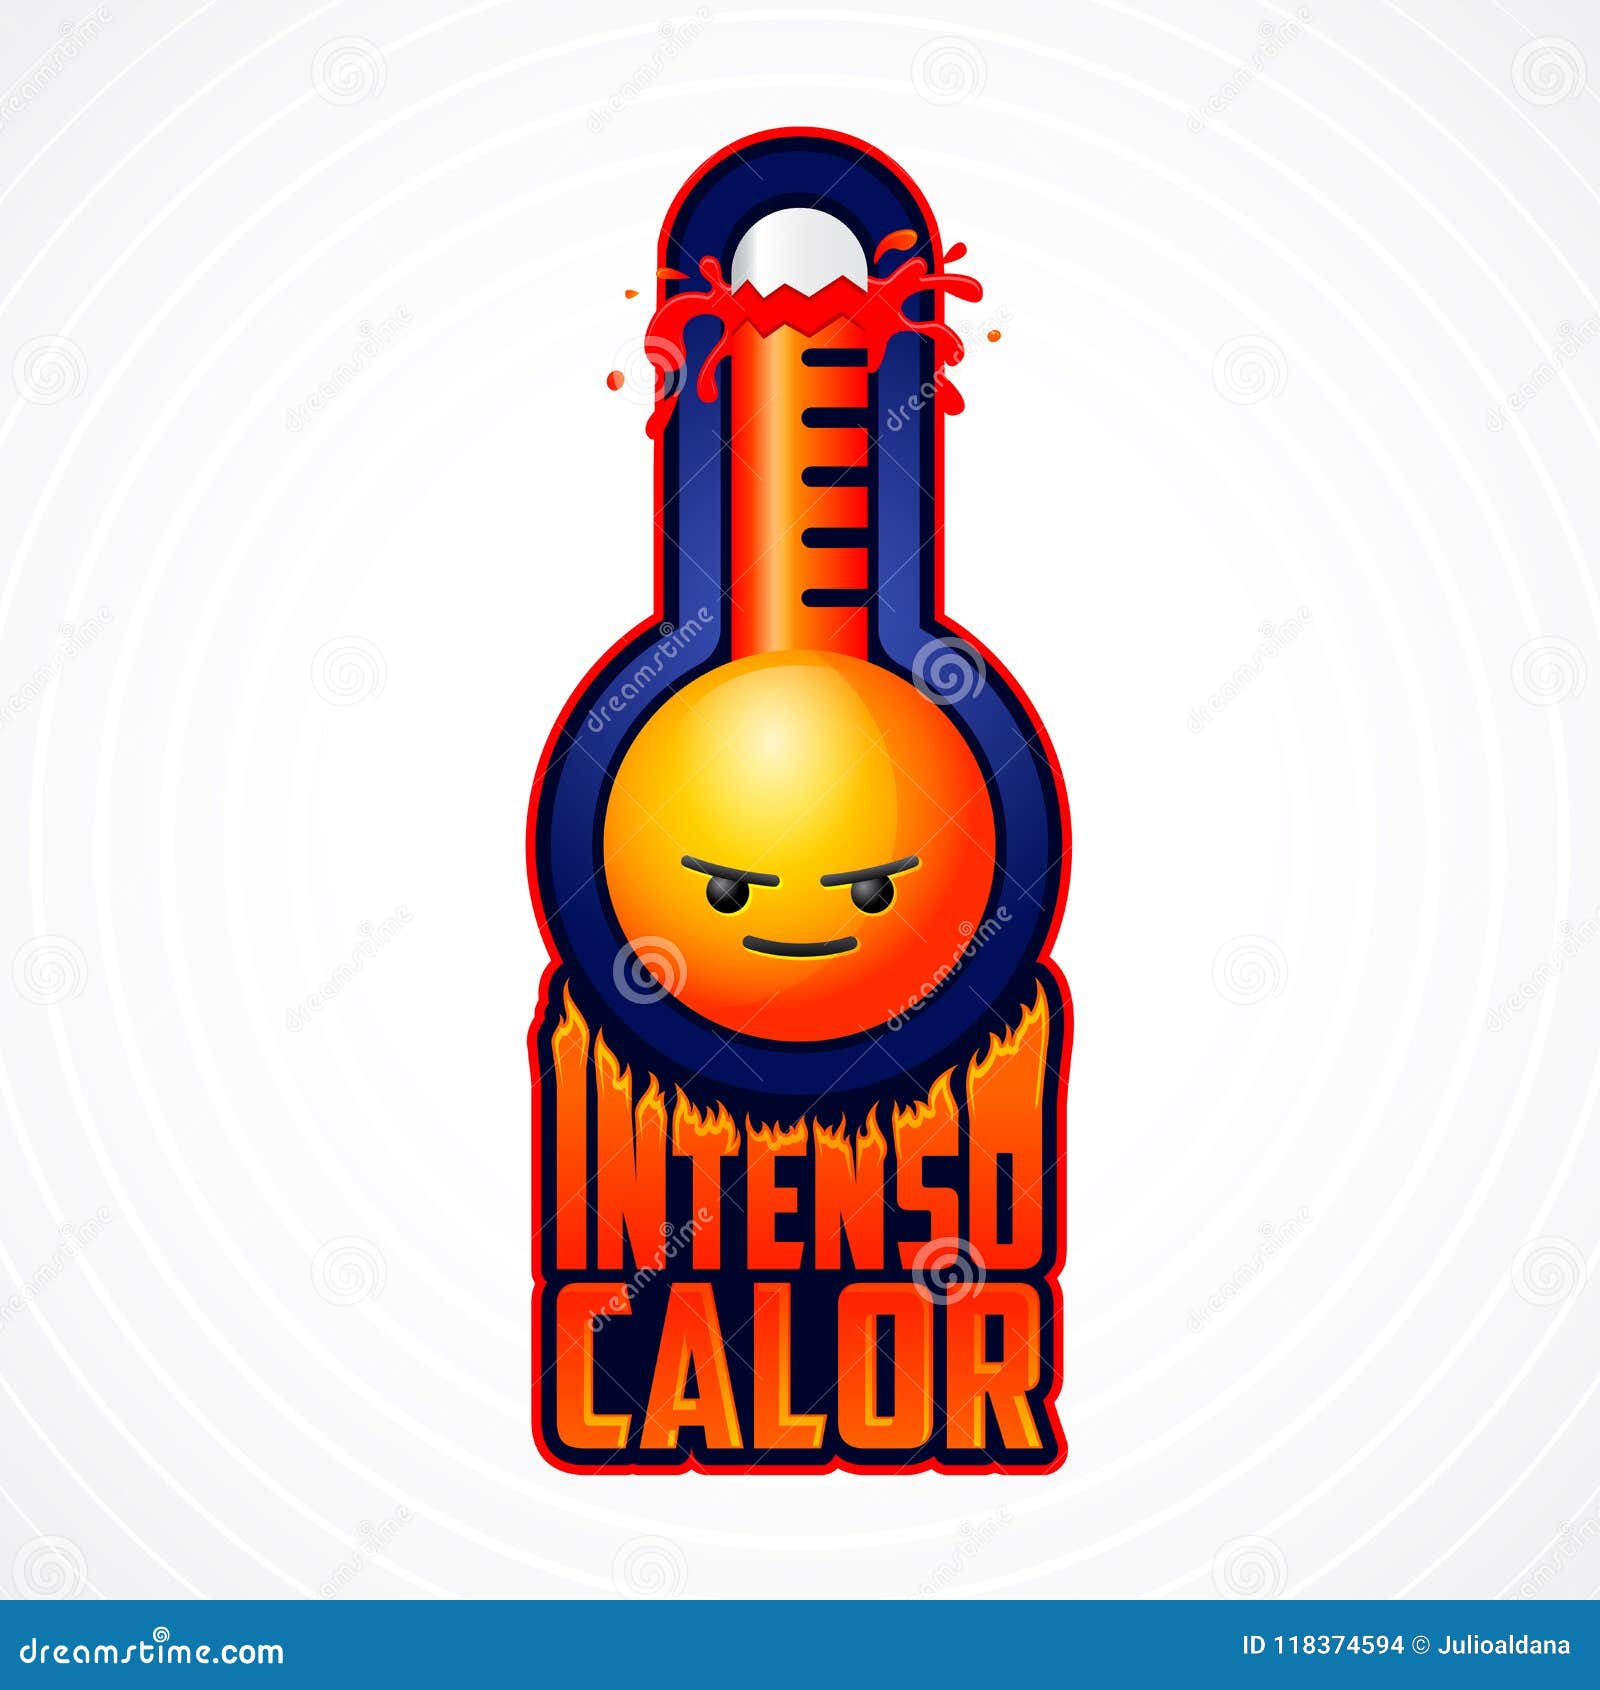 intenso calor, intense heat spanish text,  weather warning sign with evil cartoon face and flames.